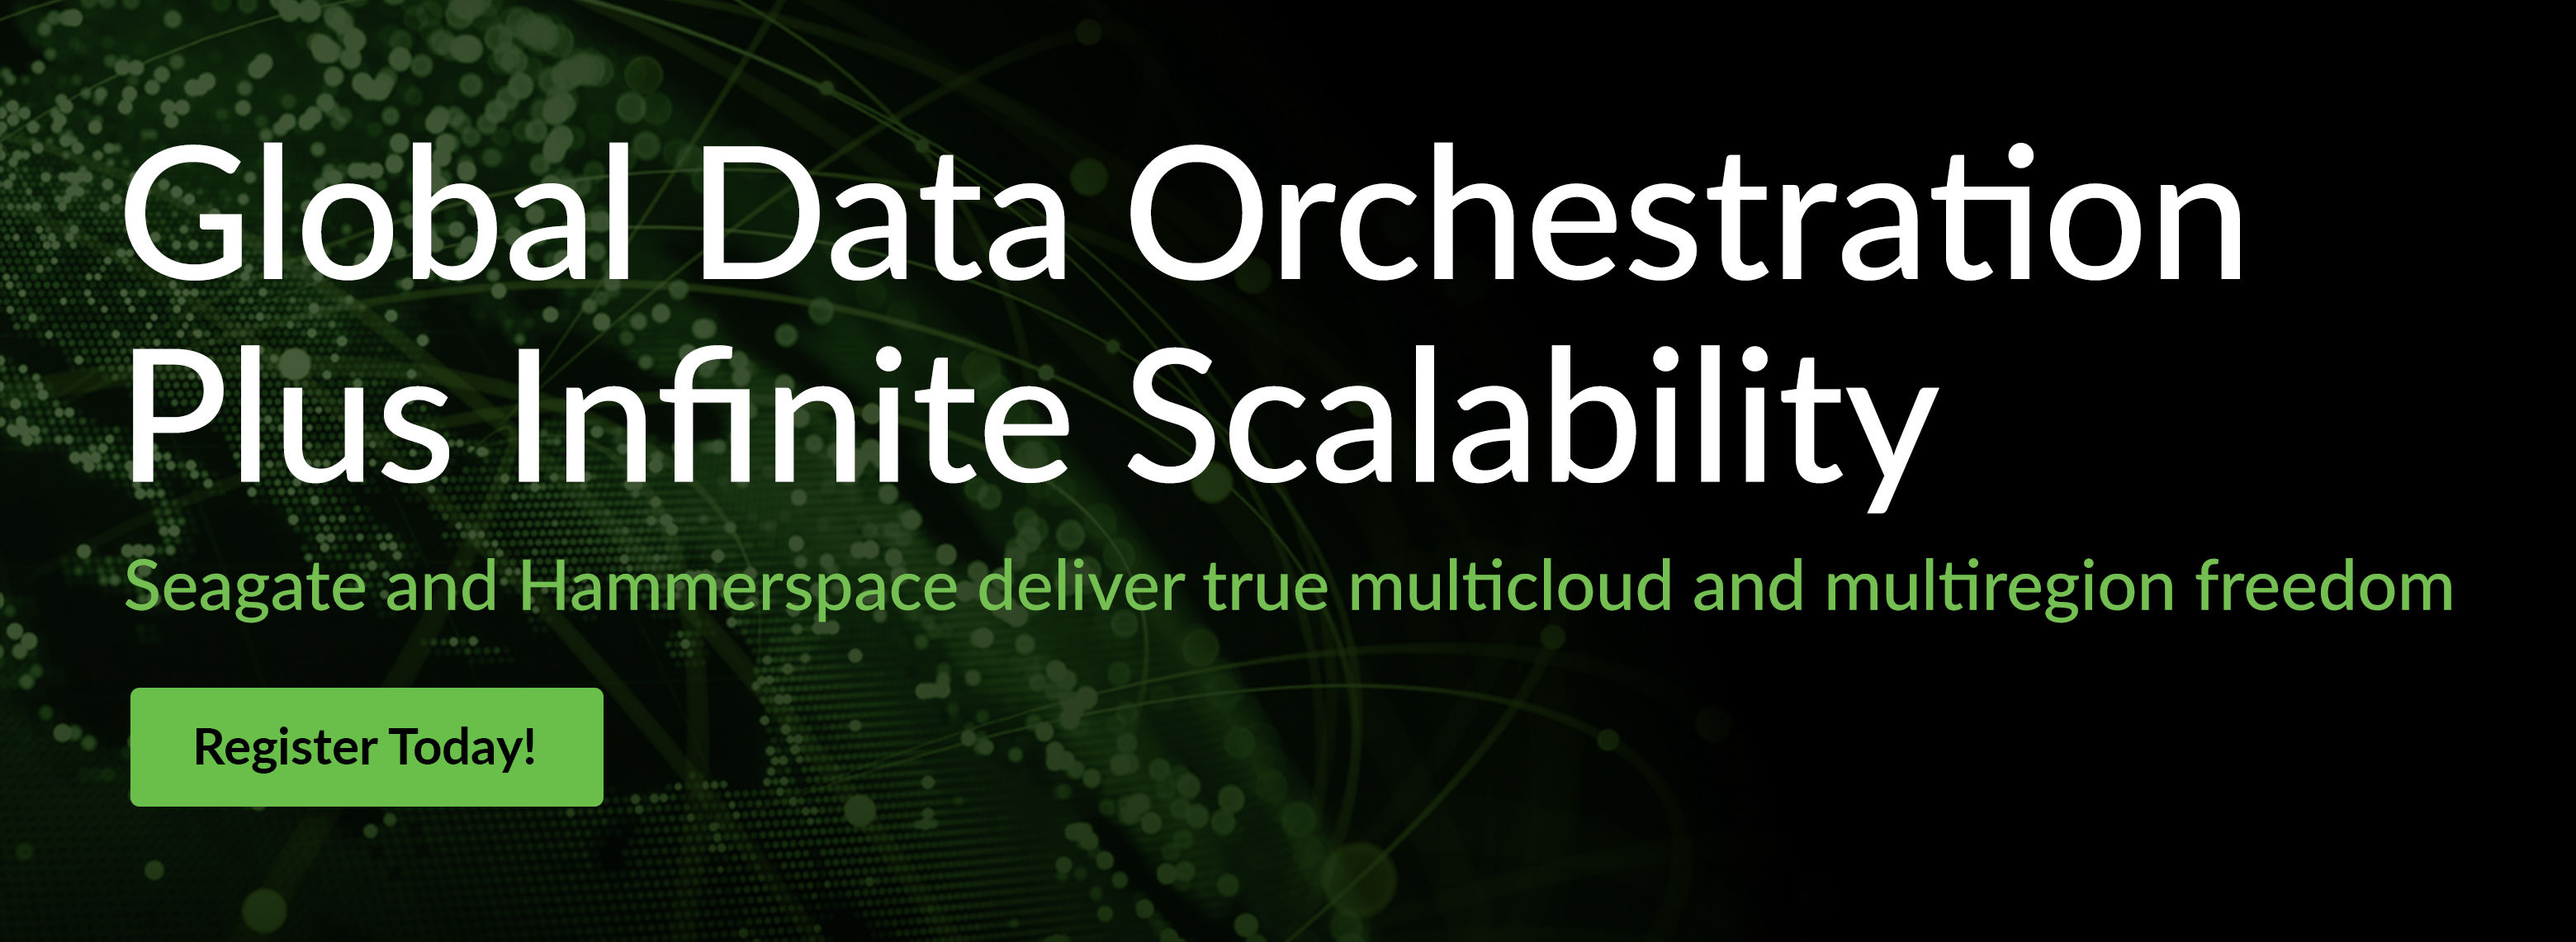 Global Data Orchestration Plus Infinite Scalibility